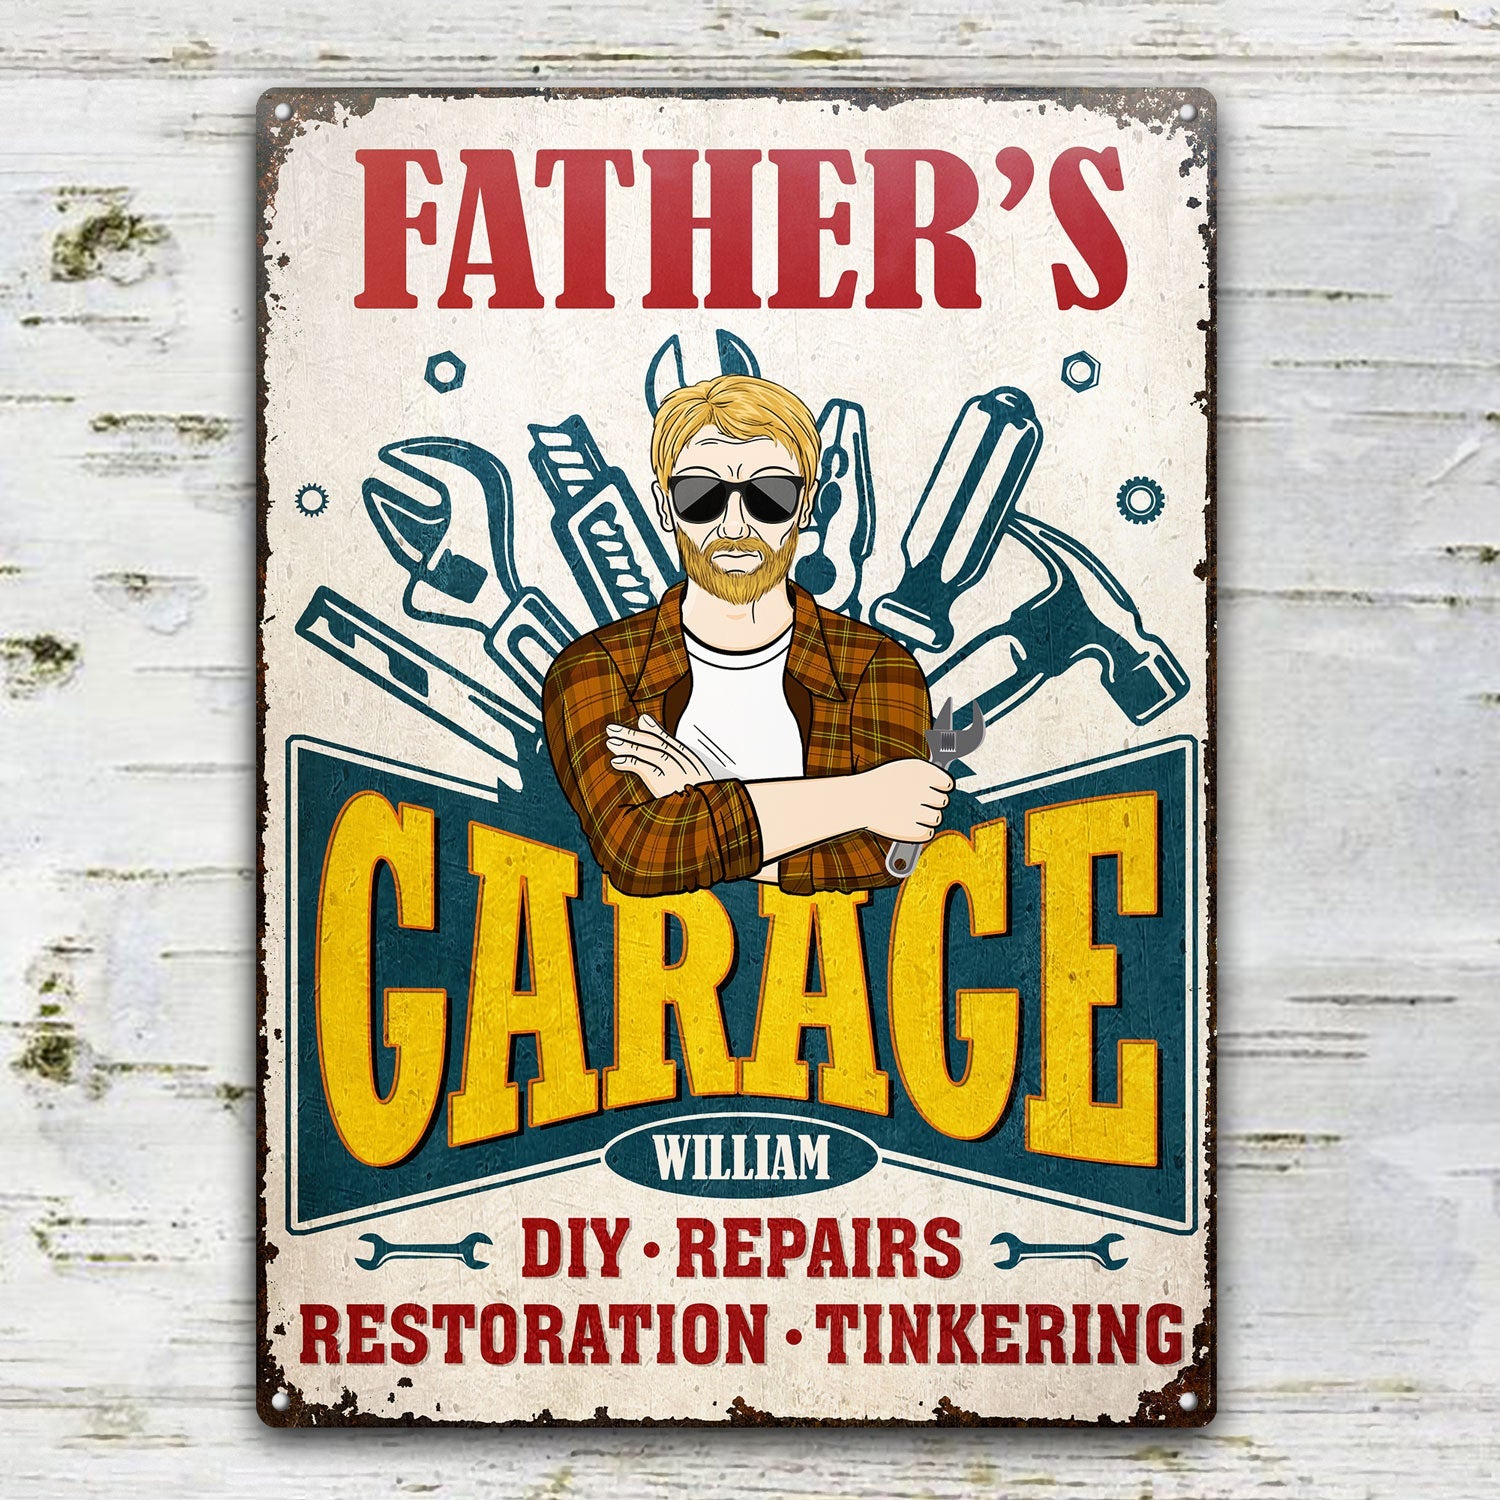 Dad's Grandpa's Workshop Restoration Tinkering - Gift For Father, Grandfather - Personalized Classic Metal Signs